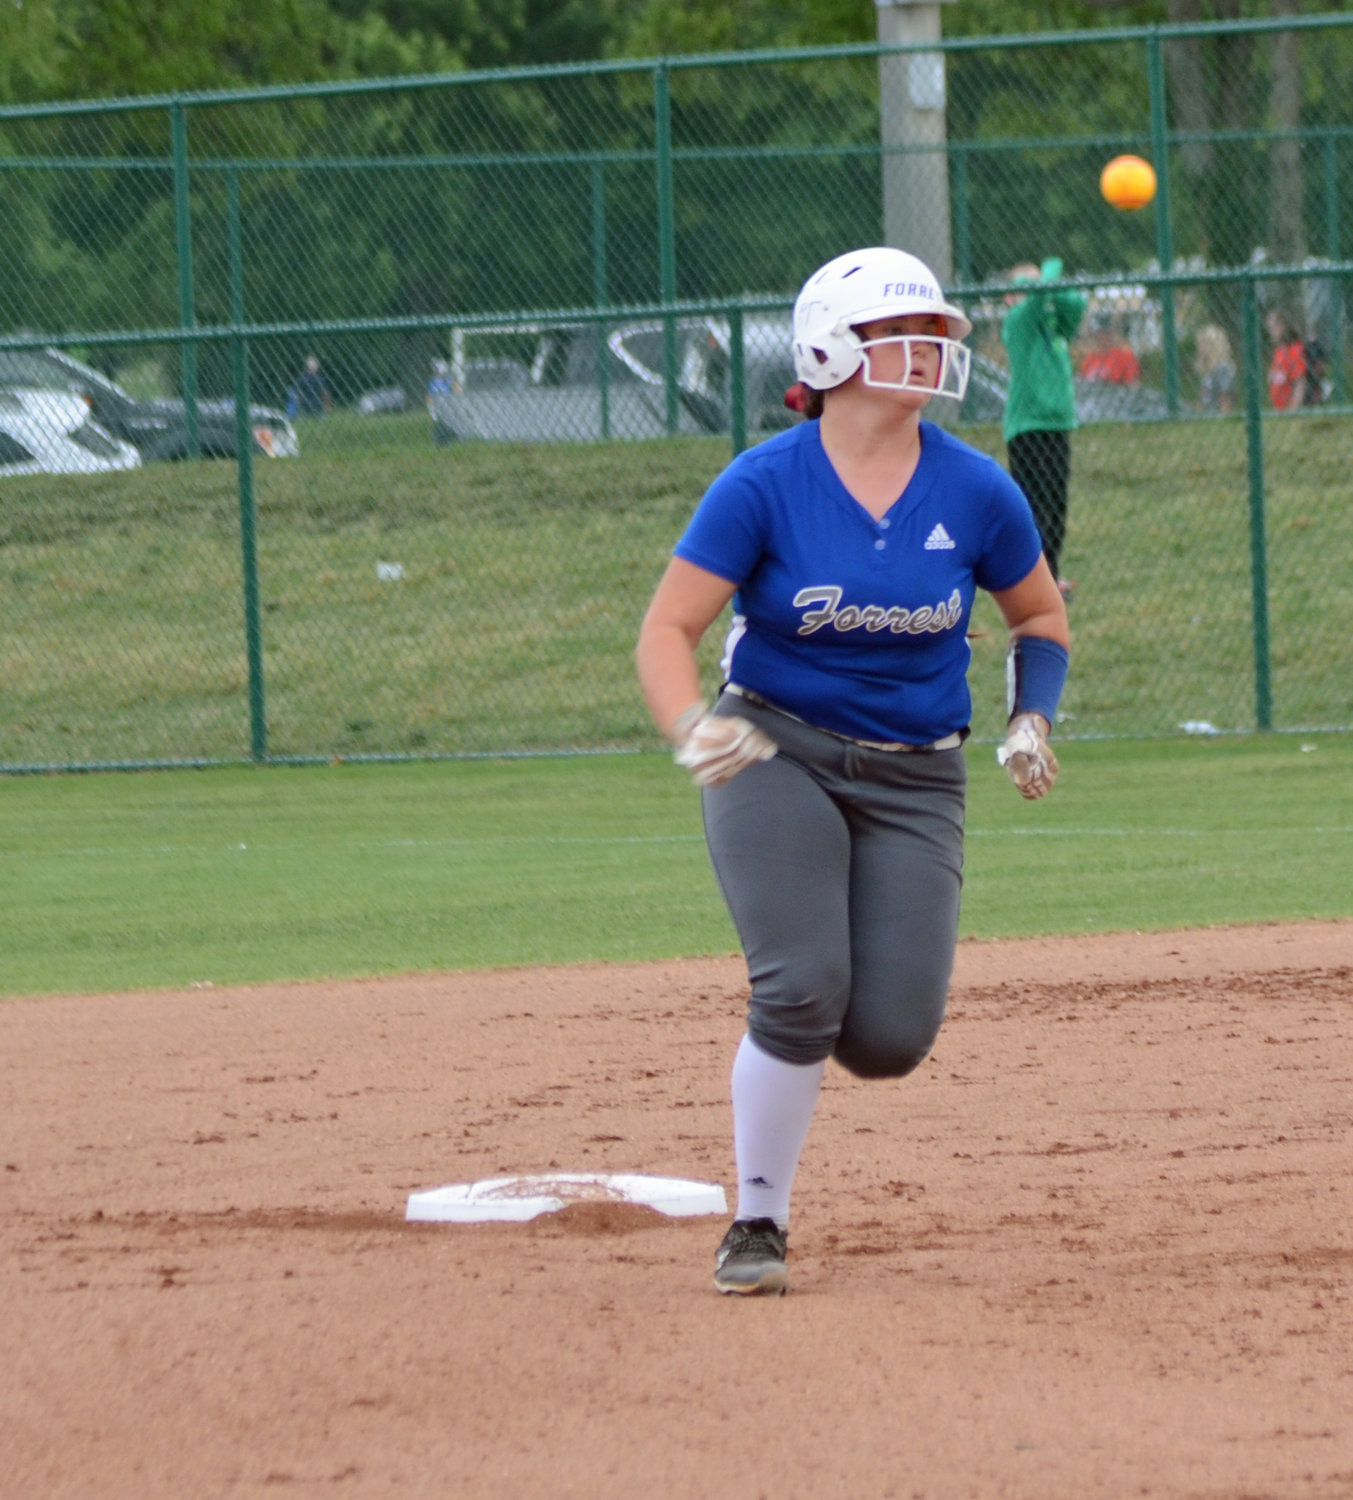 Carli Warner rounds second base on her way to home plate after jacking a two-run homerun in the first inning.